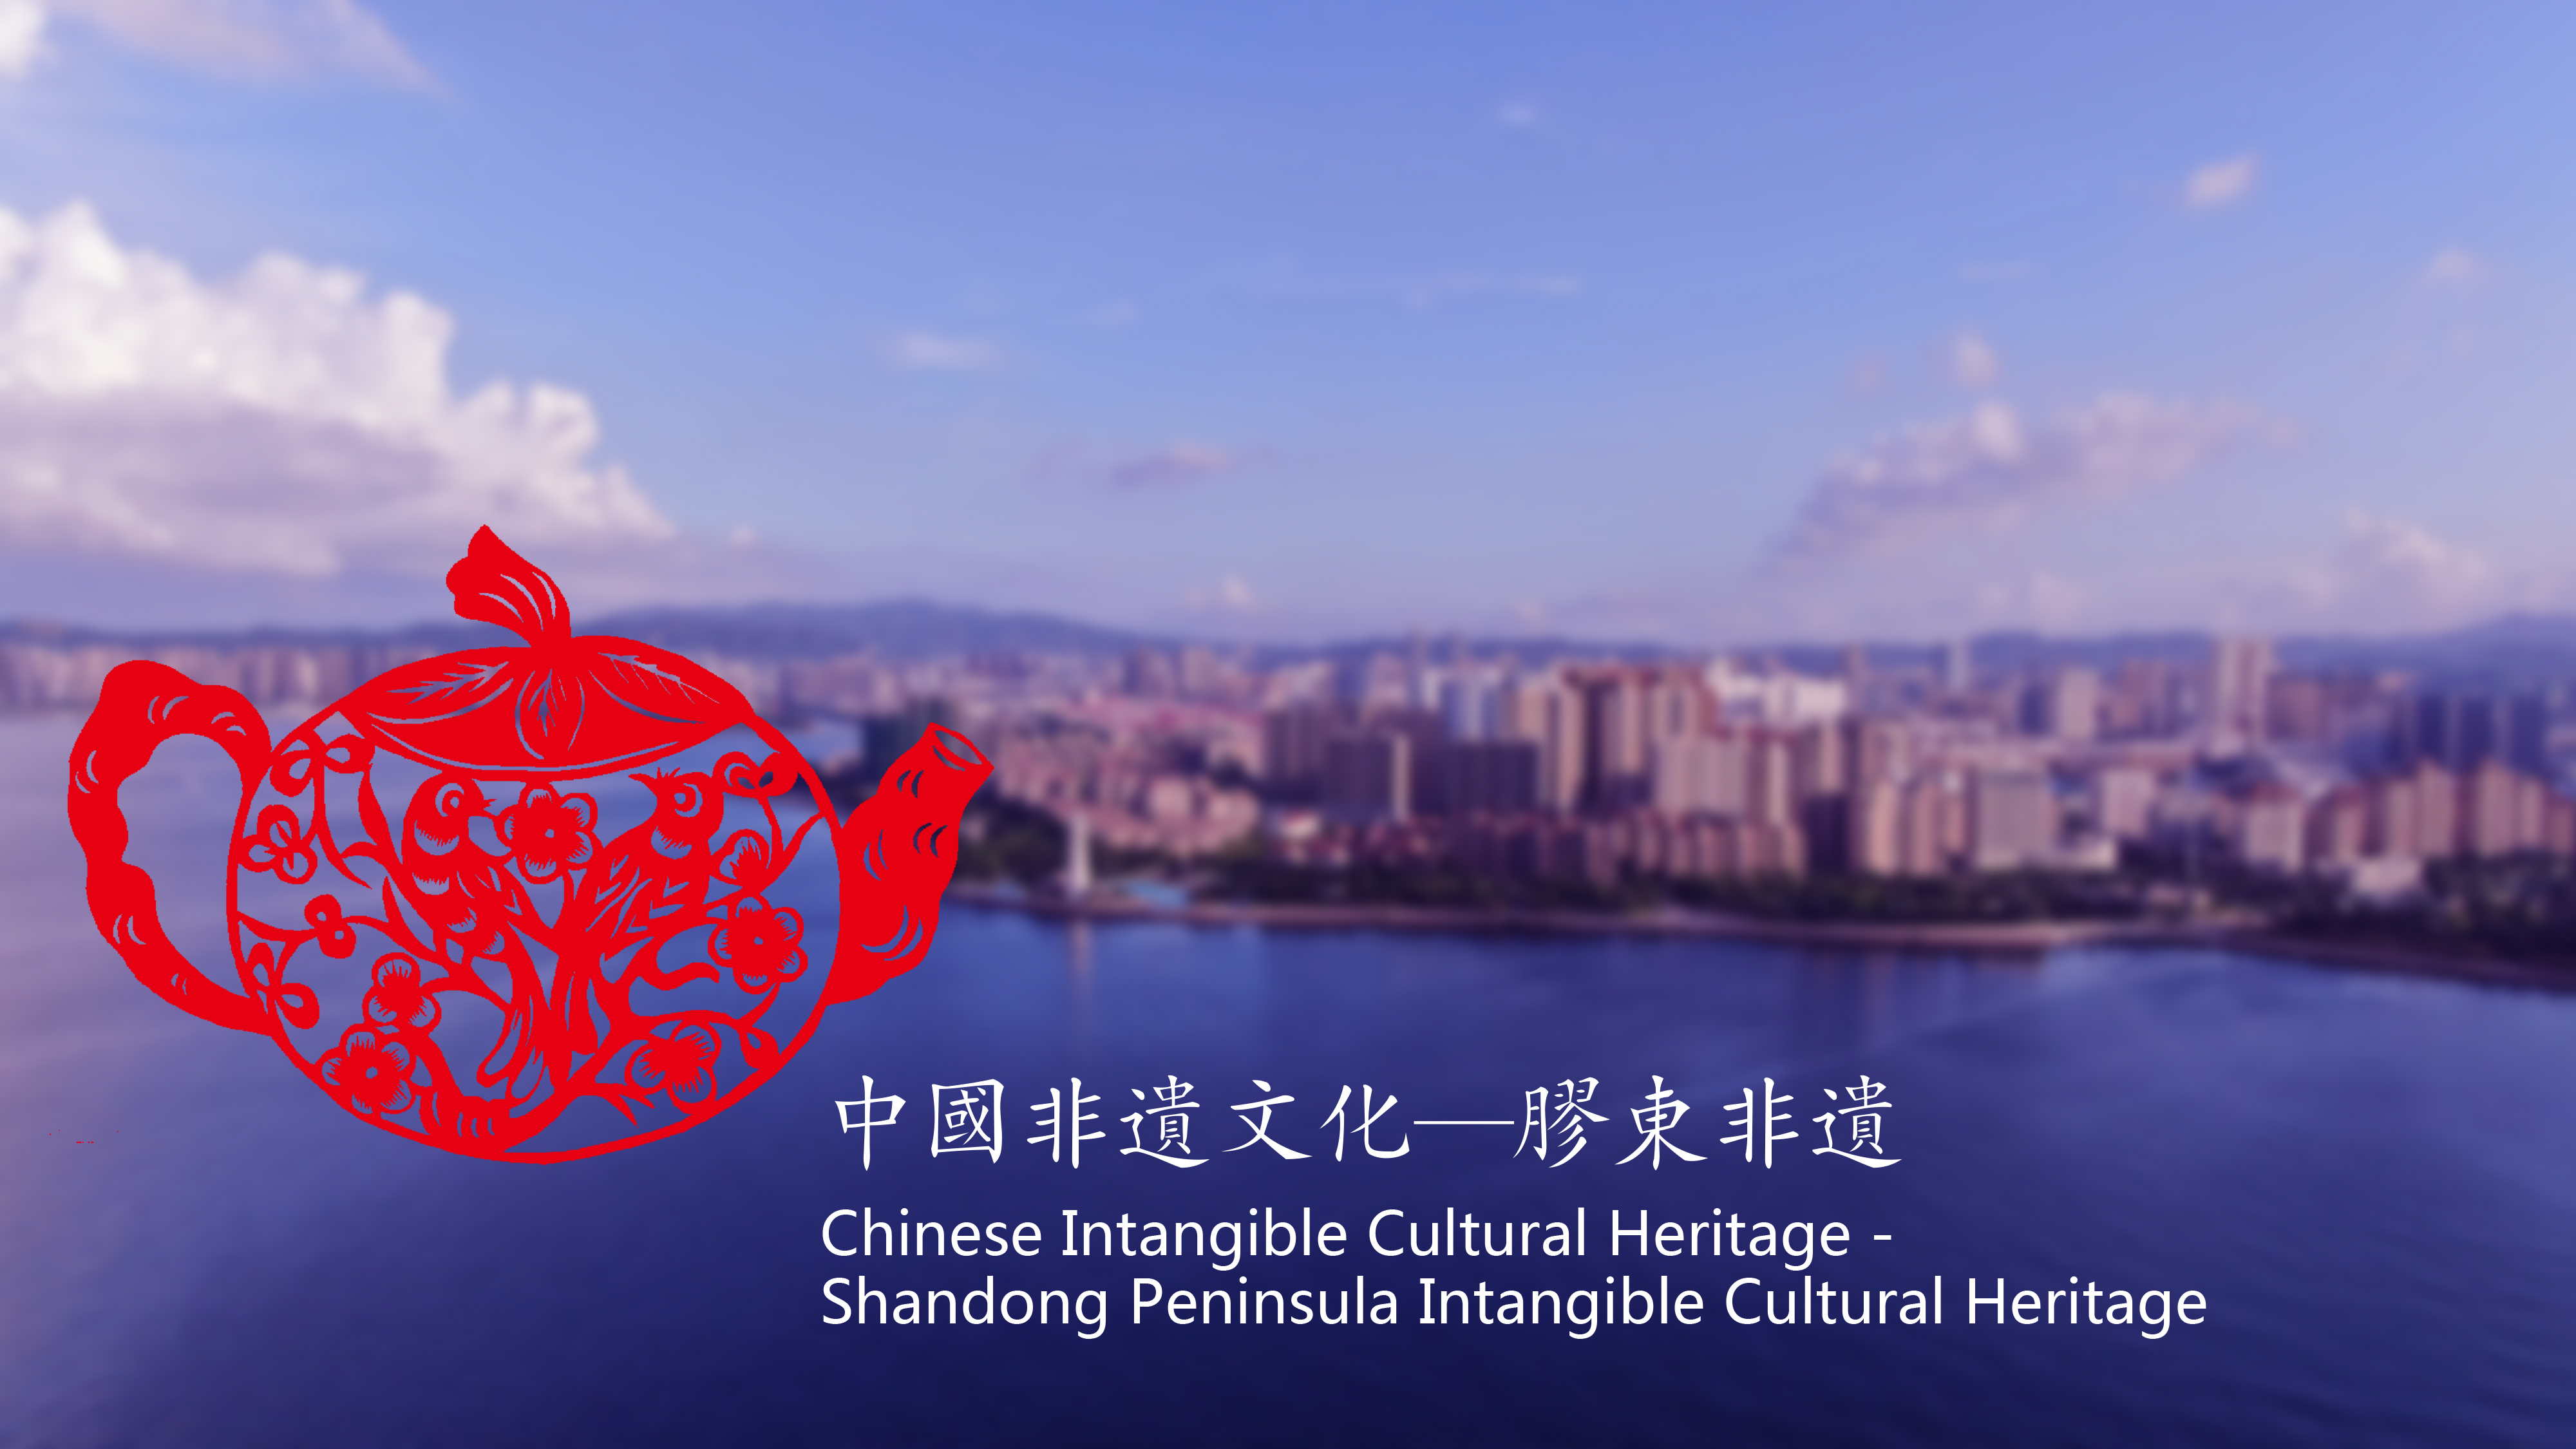 Chinese Intangible Cultural Heritage - Shandong Peninsula Intangible Cultural Heritage